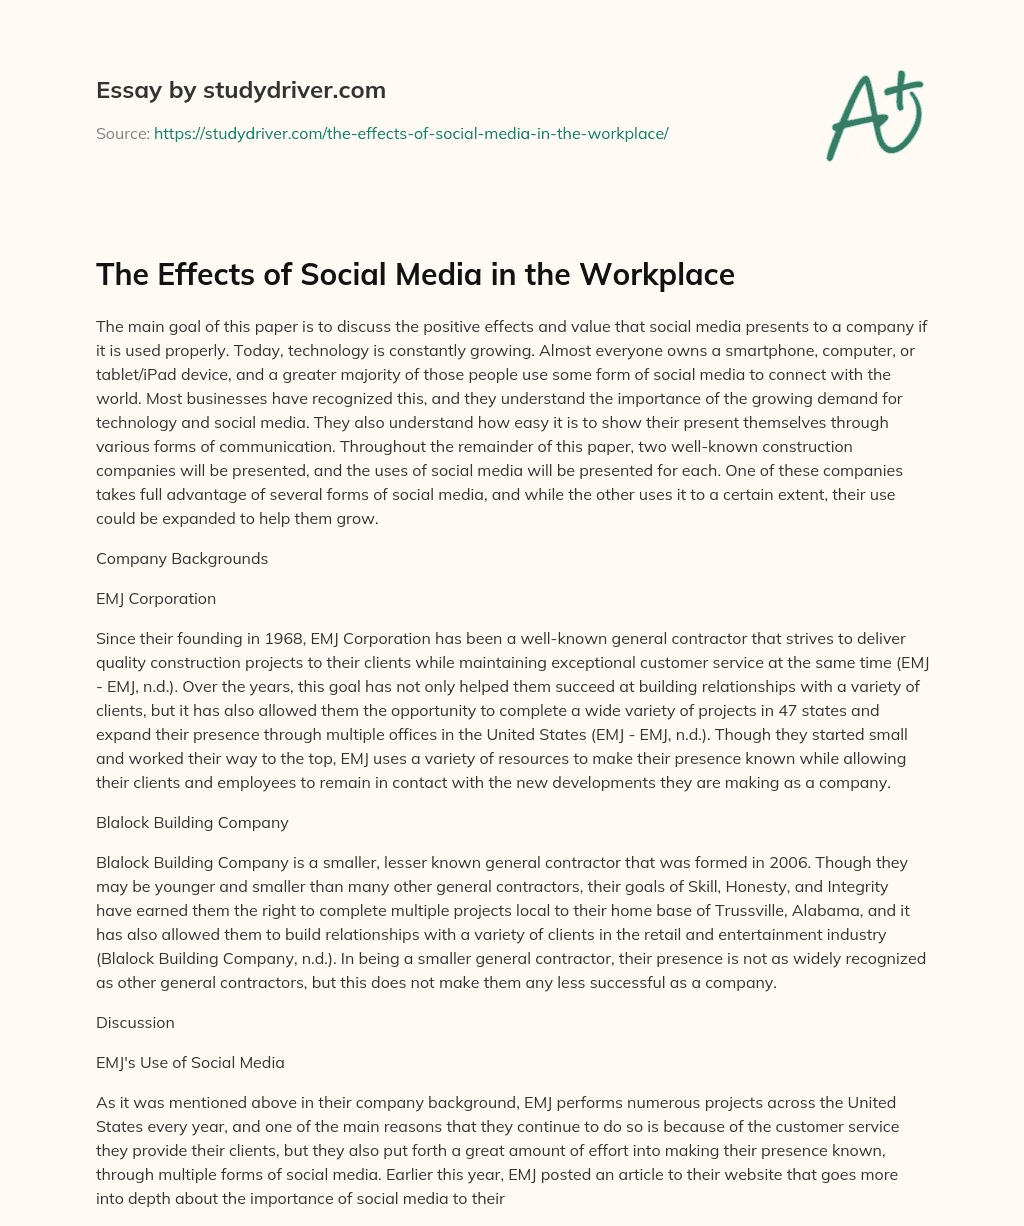 The Effects of Social Media in the Workplace essay